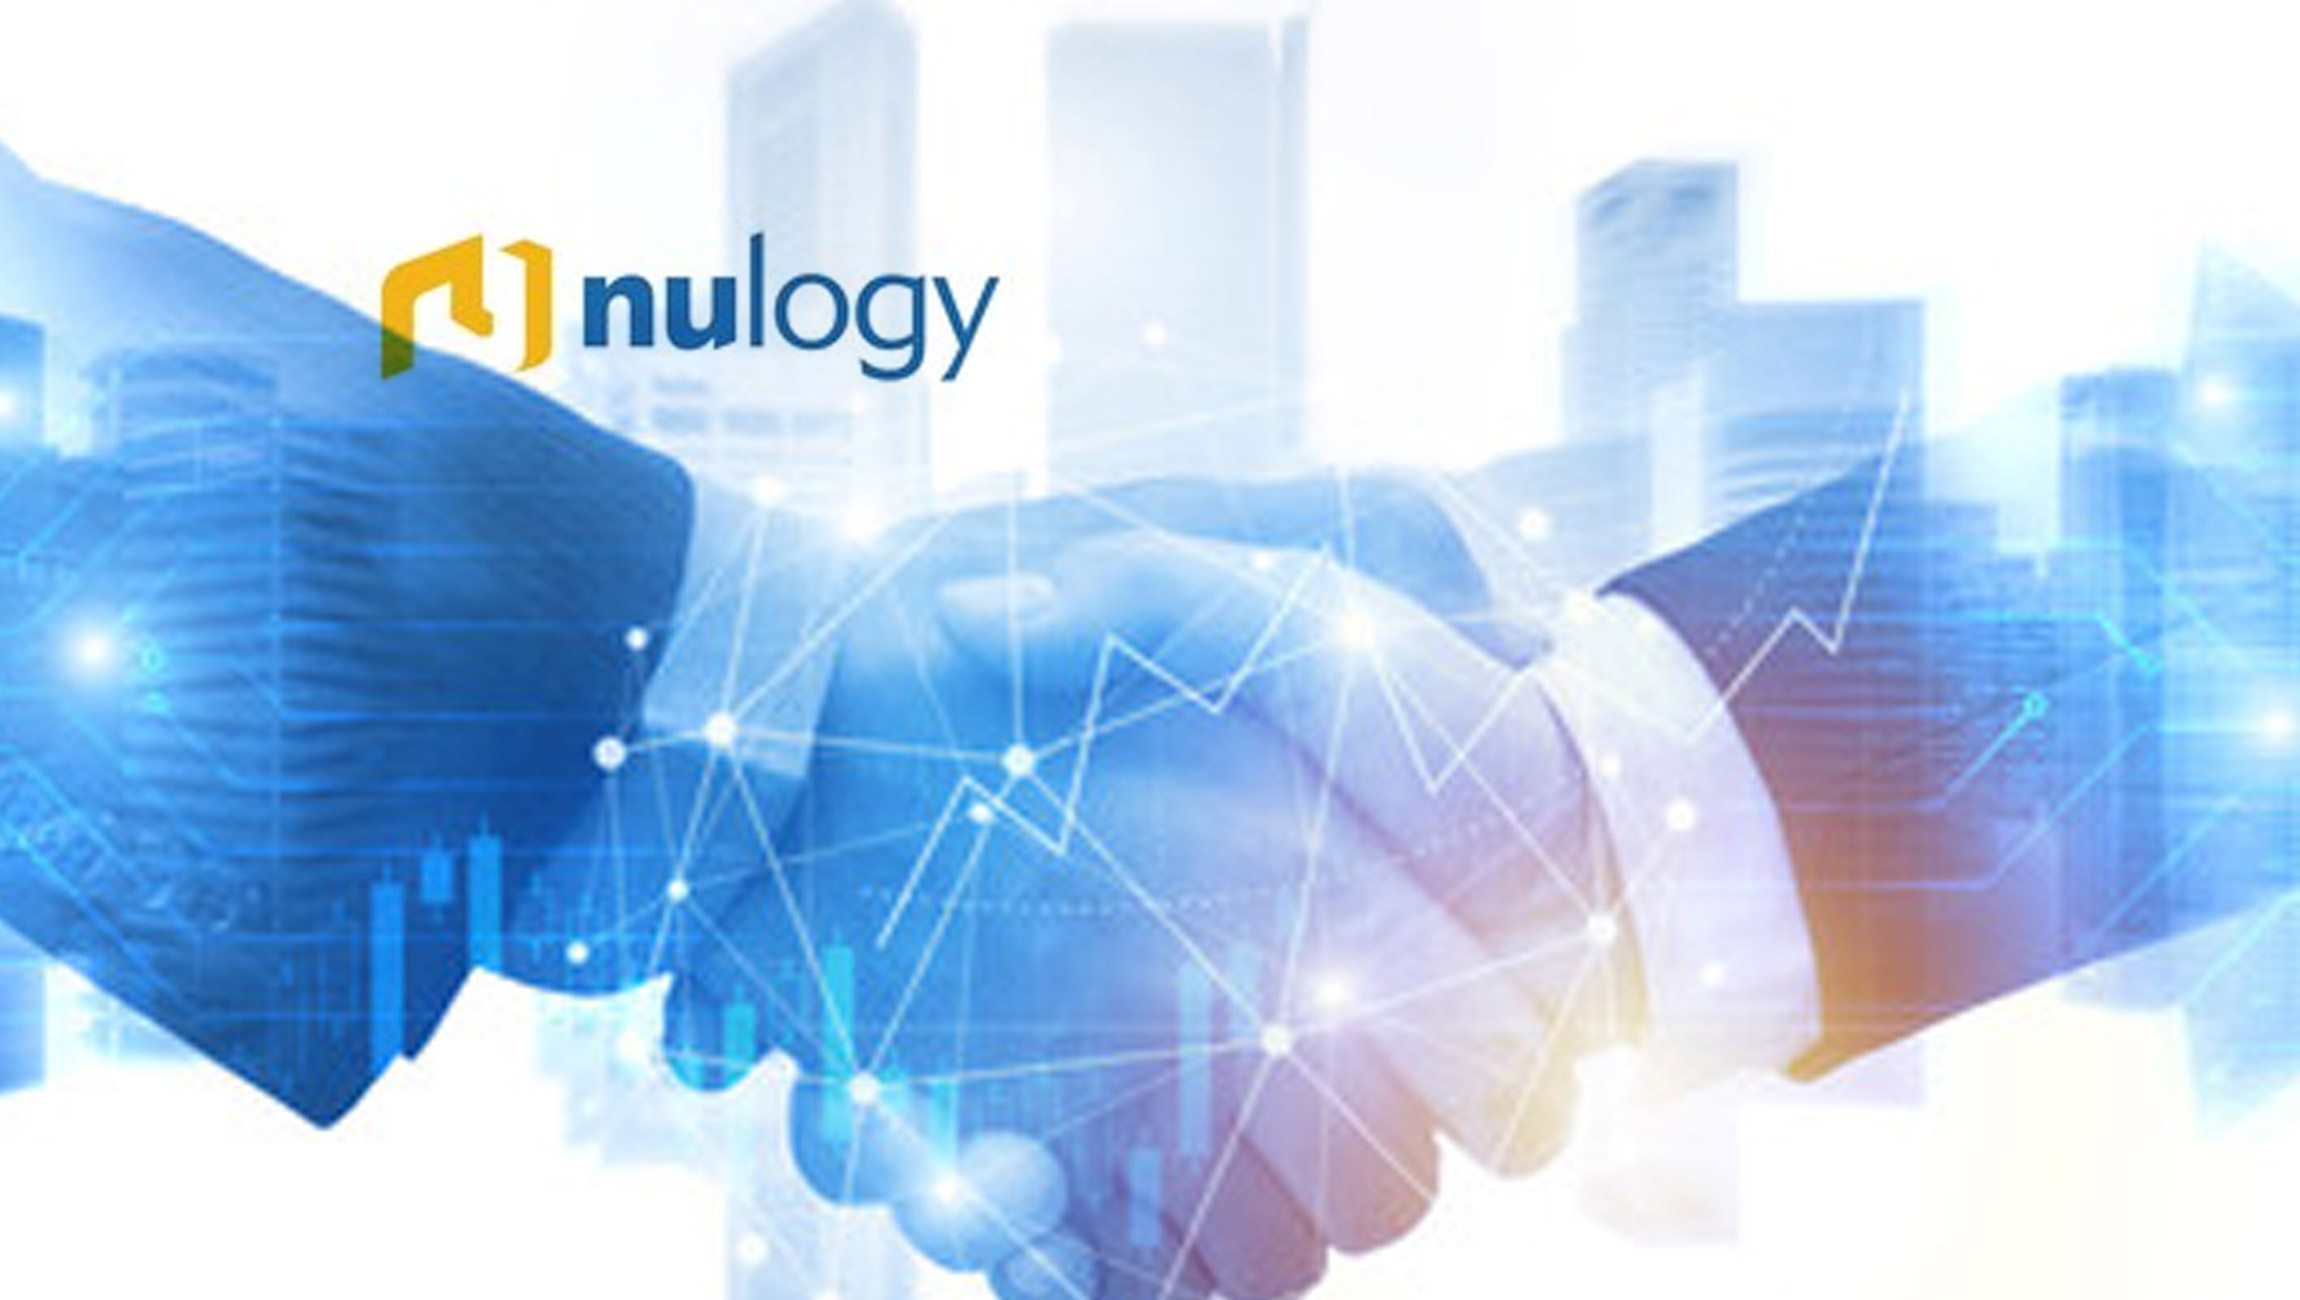 Nulogy Named a 2022 Great Supply Chain Partner by SupplyChainBrain